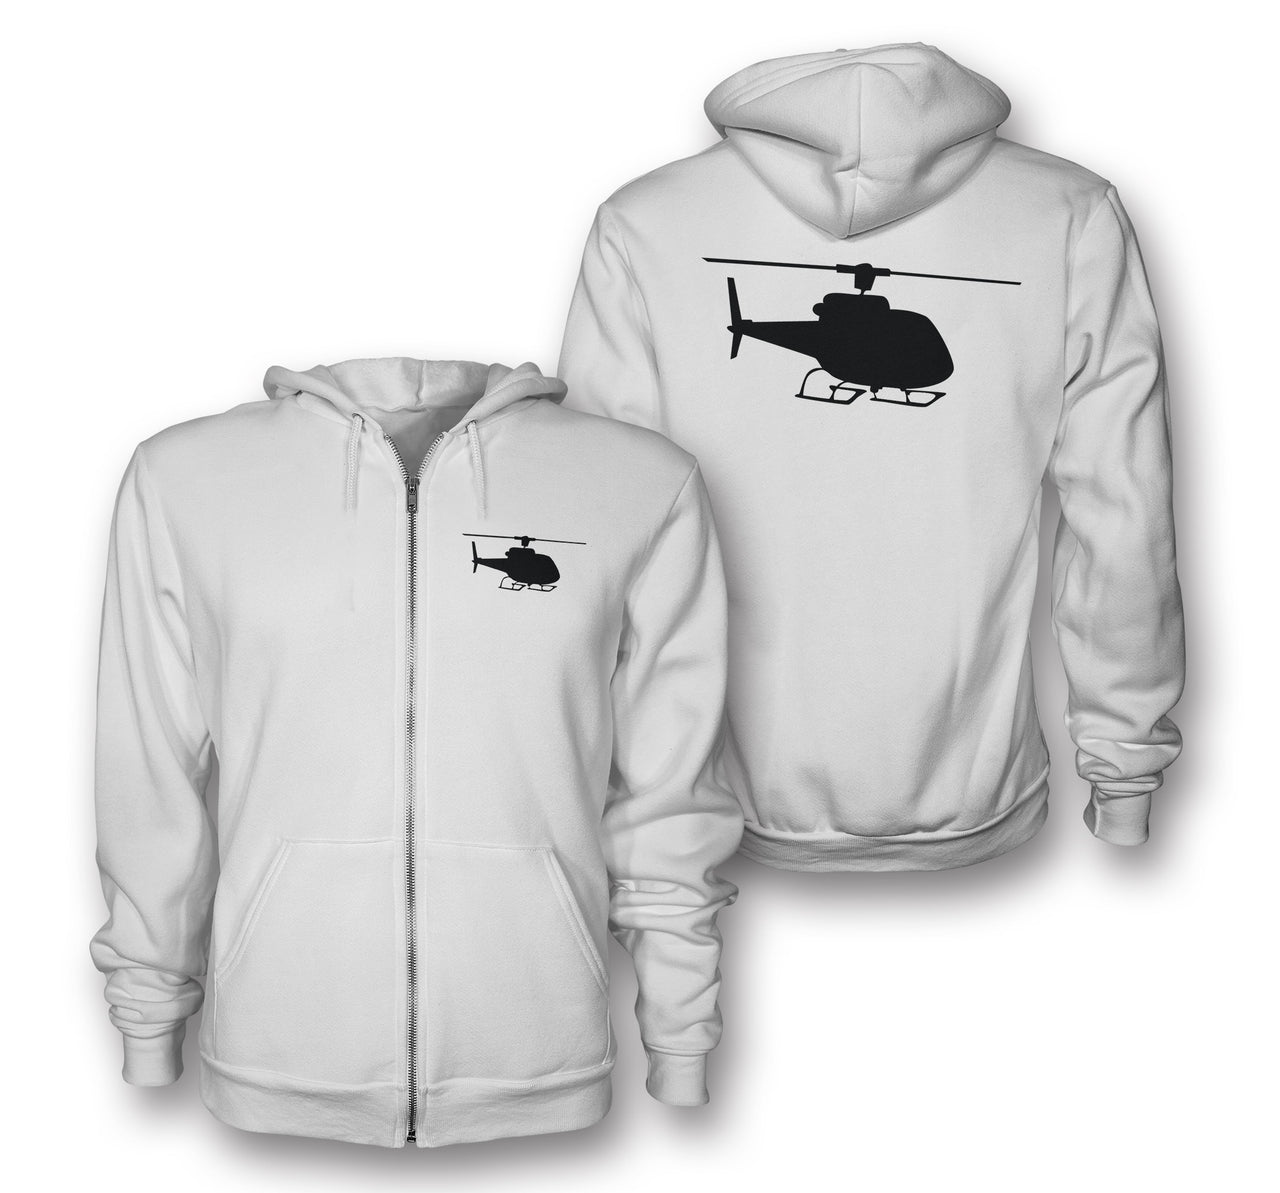 Helicopter Silhouette Designed Zipped Hoodies